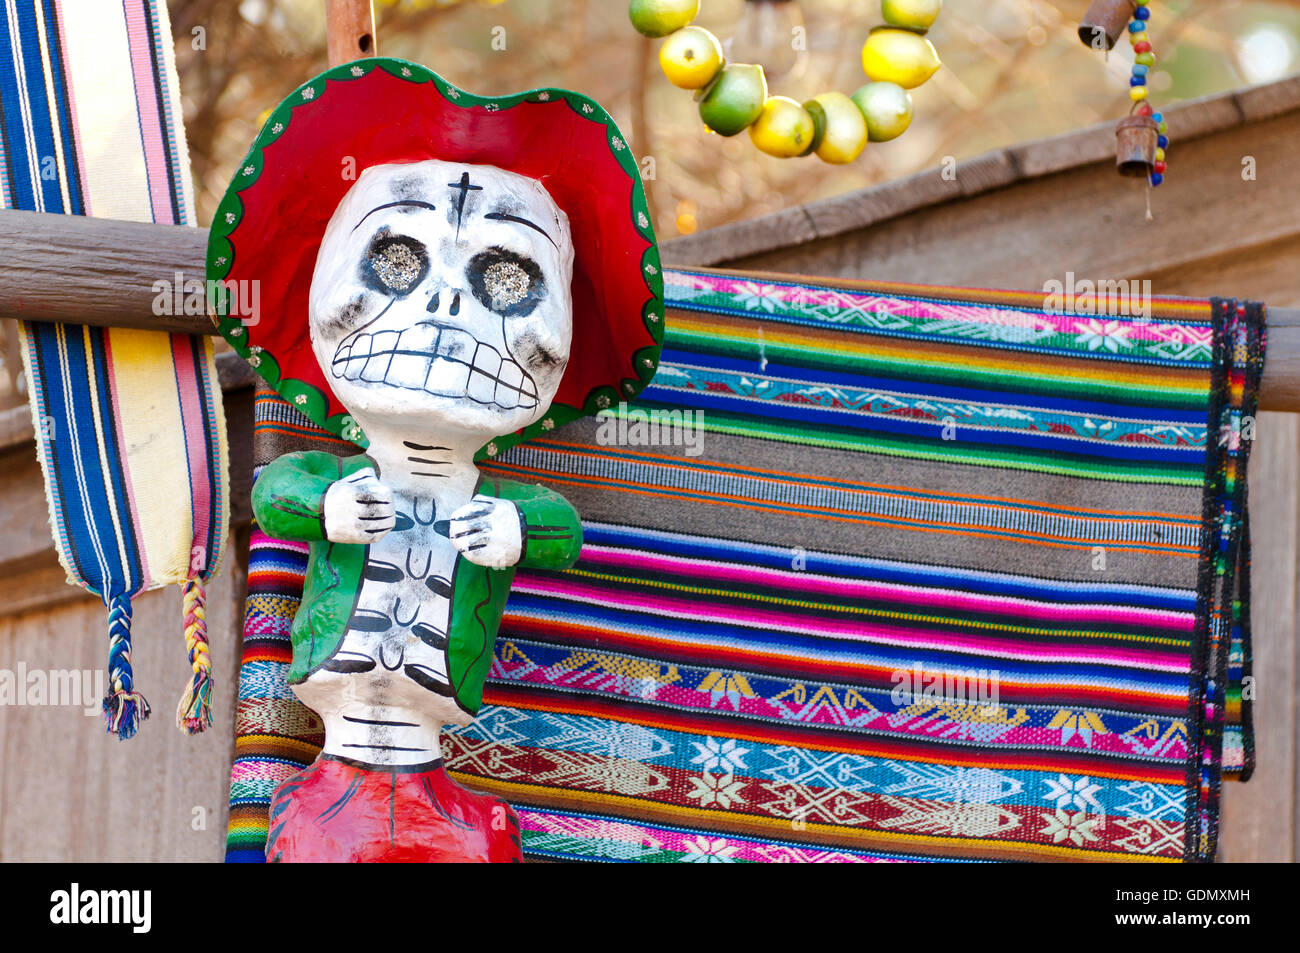 Funny Mexican Day of the Dead Skull Mask Stock Photo